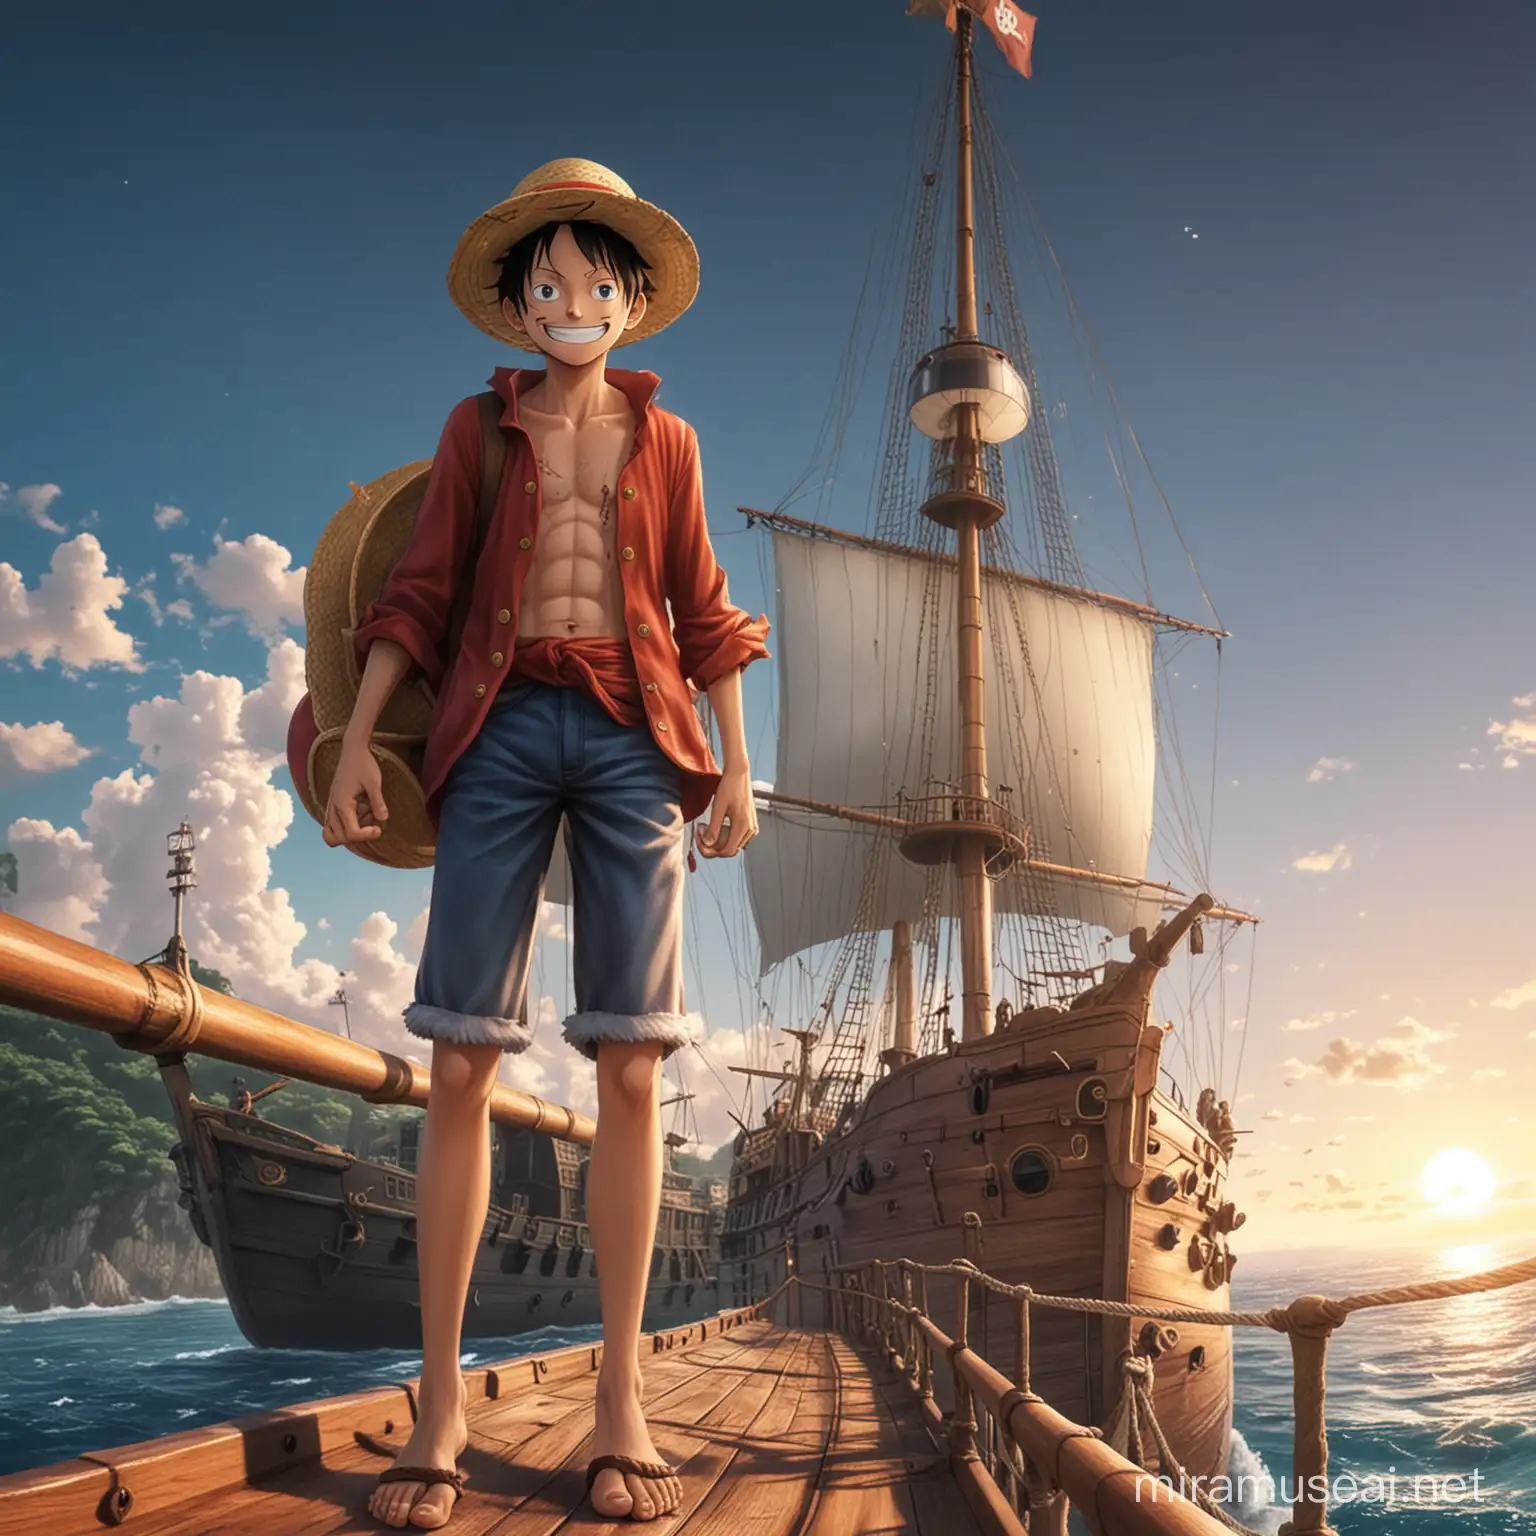 Luffy on the ship find the 26.886.350$